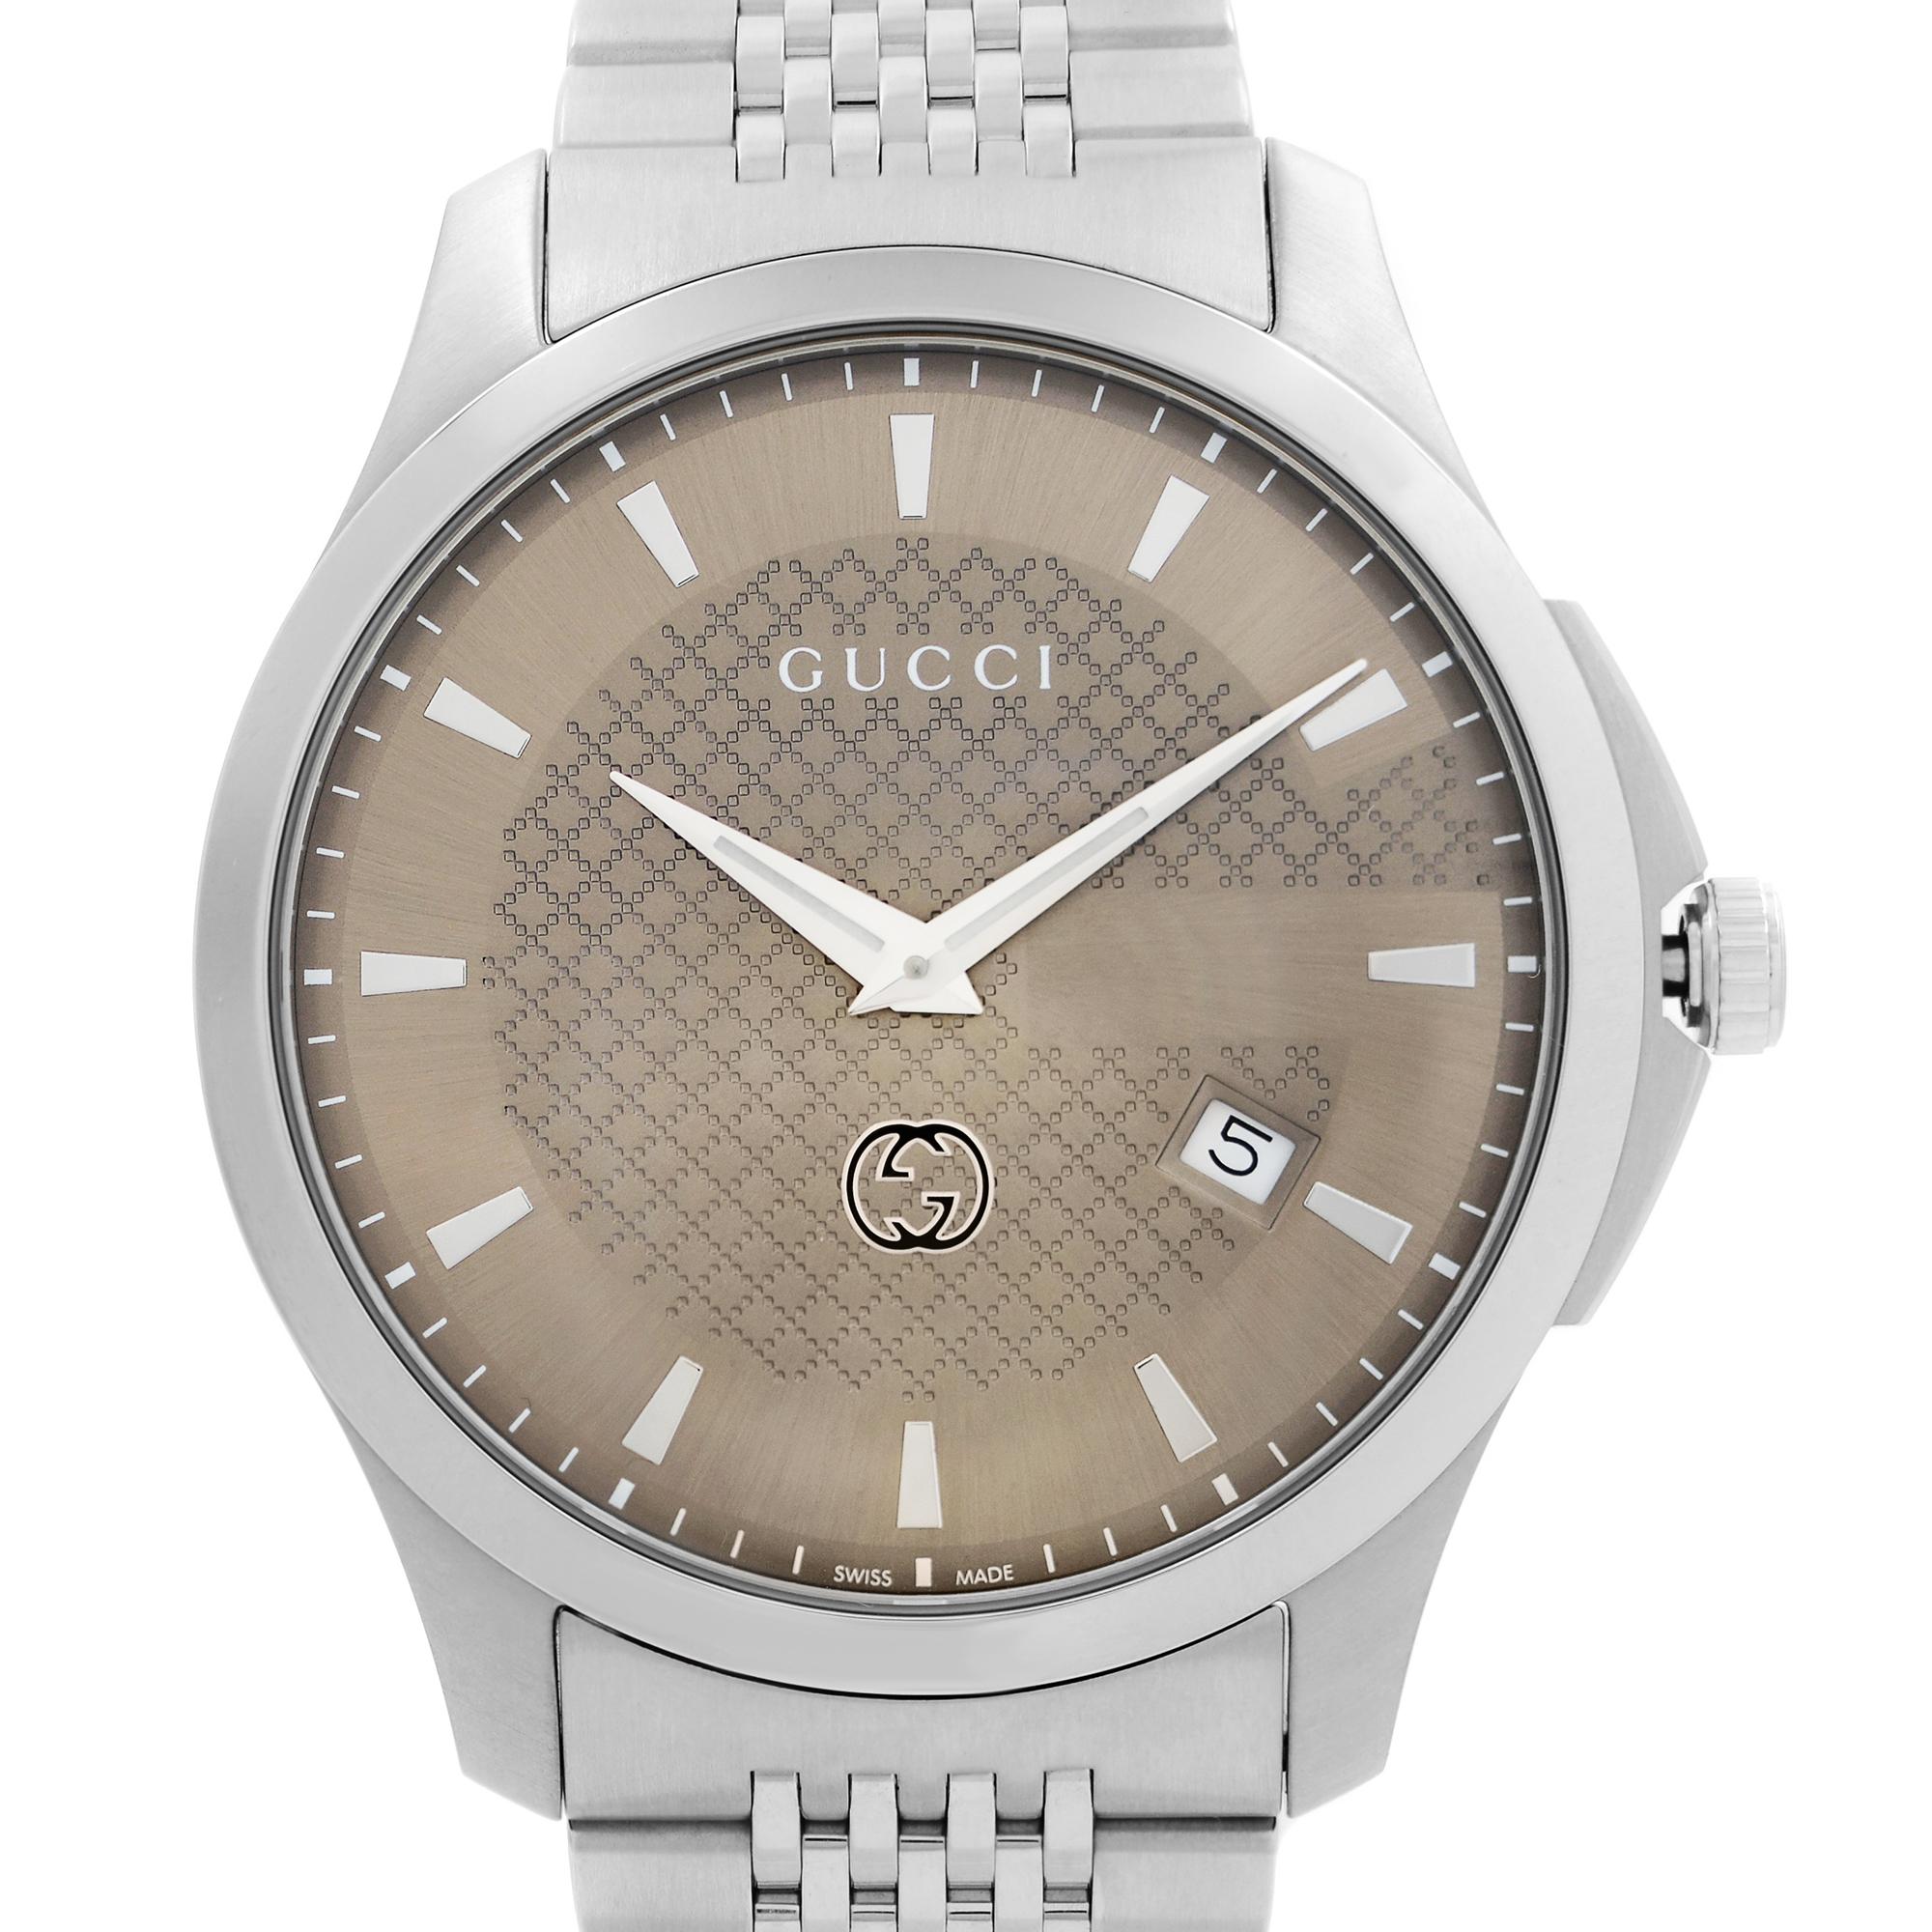 Display Model Gucci G-Timeless Stainless Steel Brown Diamond Pattern Men's Watch. GG Cross Logo On Dial. This Beautiful Timepiece Features: Stainless Steel Case & Bracelet, Quartz Movement, 50m Water Resistance. Comes with Original Box and